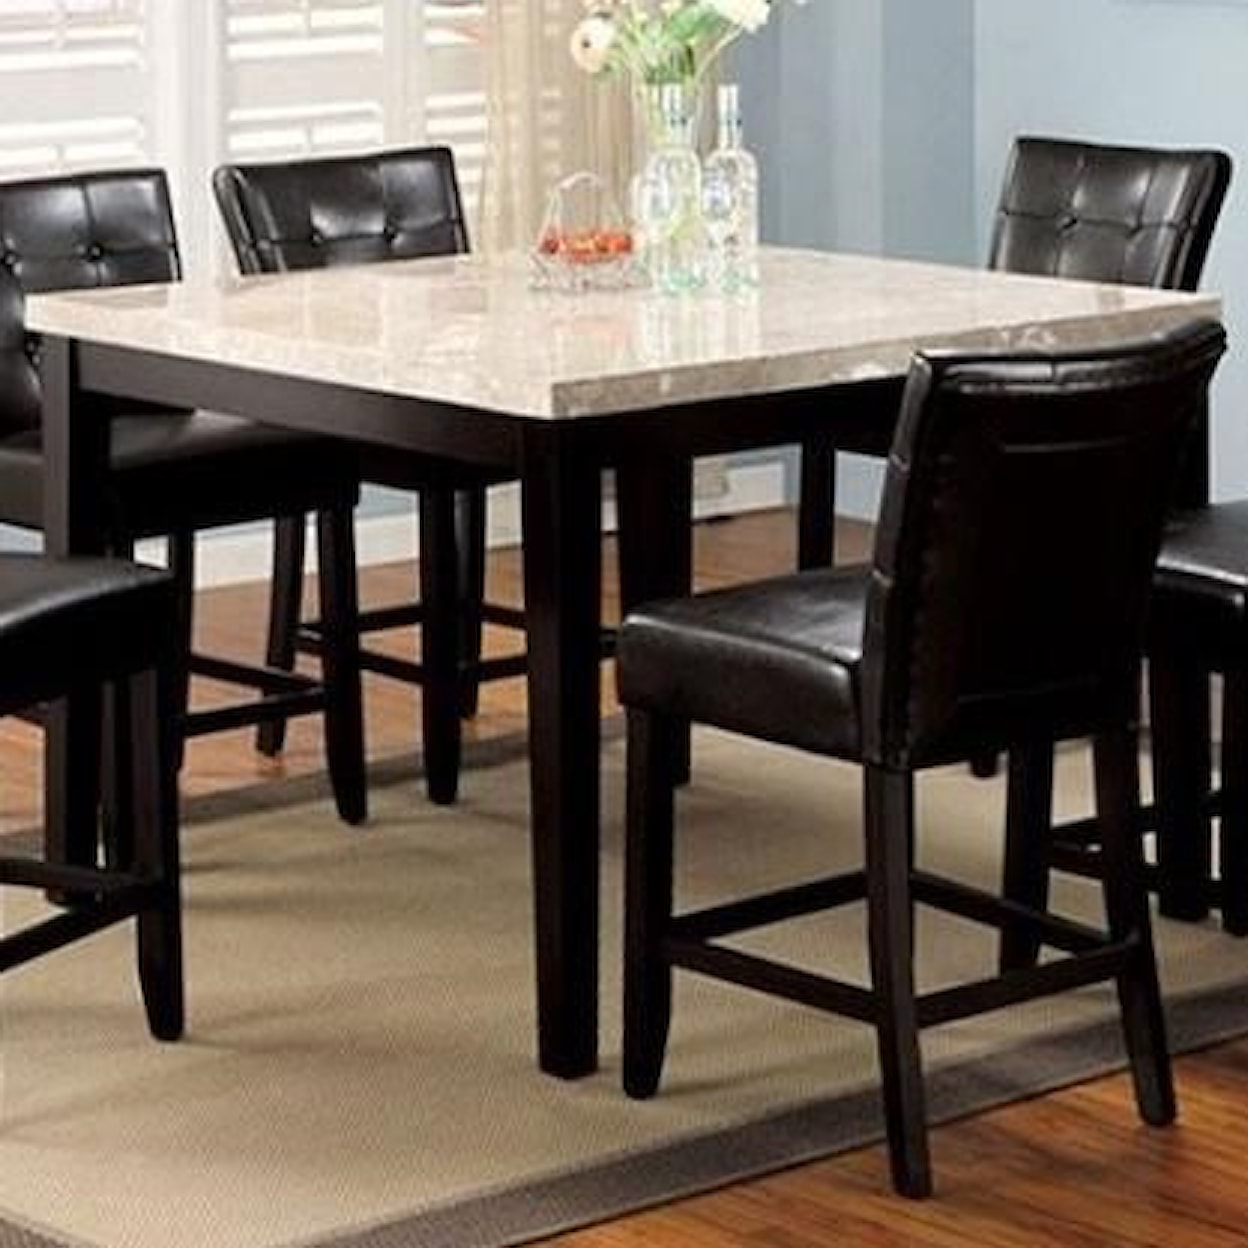 Furniture of America Marion II Square Counter Height Table